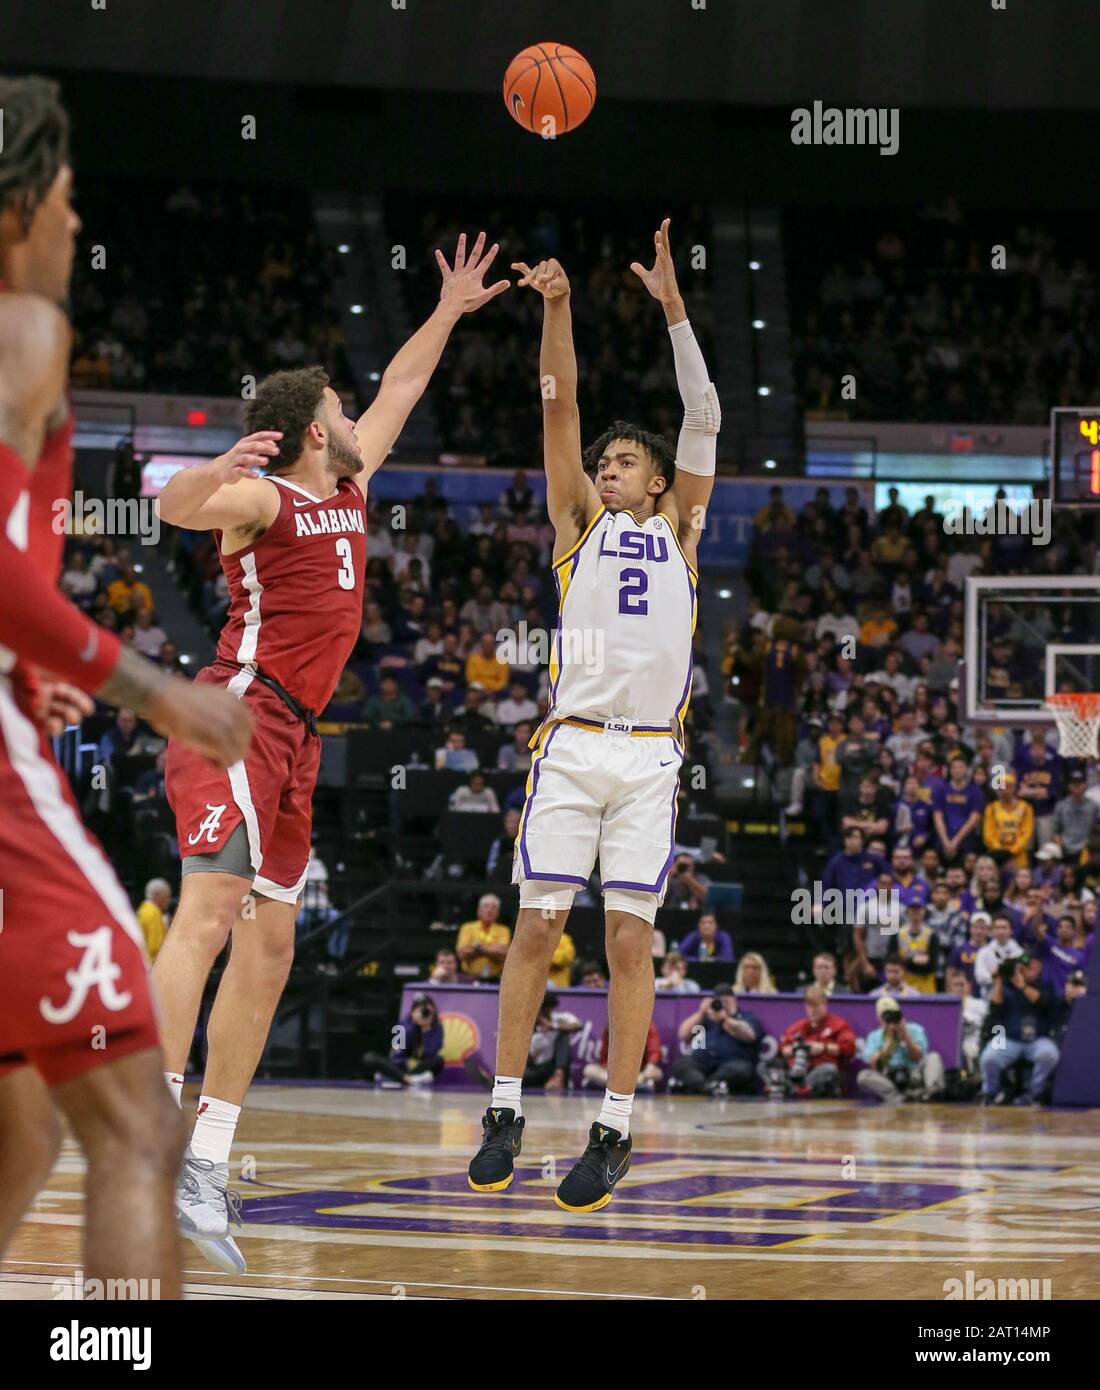 Baton Rouge, LA, USA. 29th Jan, 2020. LSU's Trendon Watford (2) puts up a shot over Alabama's Alex Reese (3) during NCAA Basketball action between the Alabama Crimson Tide and the LSU Tigers at the Pete Maravich Assembly Center in Baton Rouge, LA. Jonathan Mailhes/CSM/Alamy Live News Stock Photo